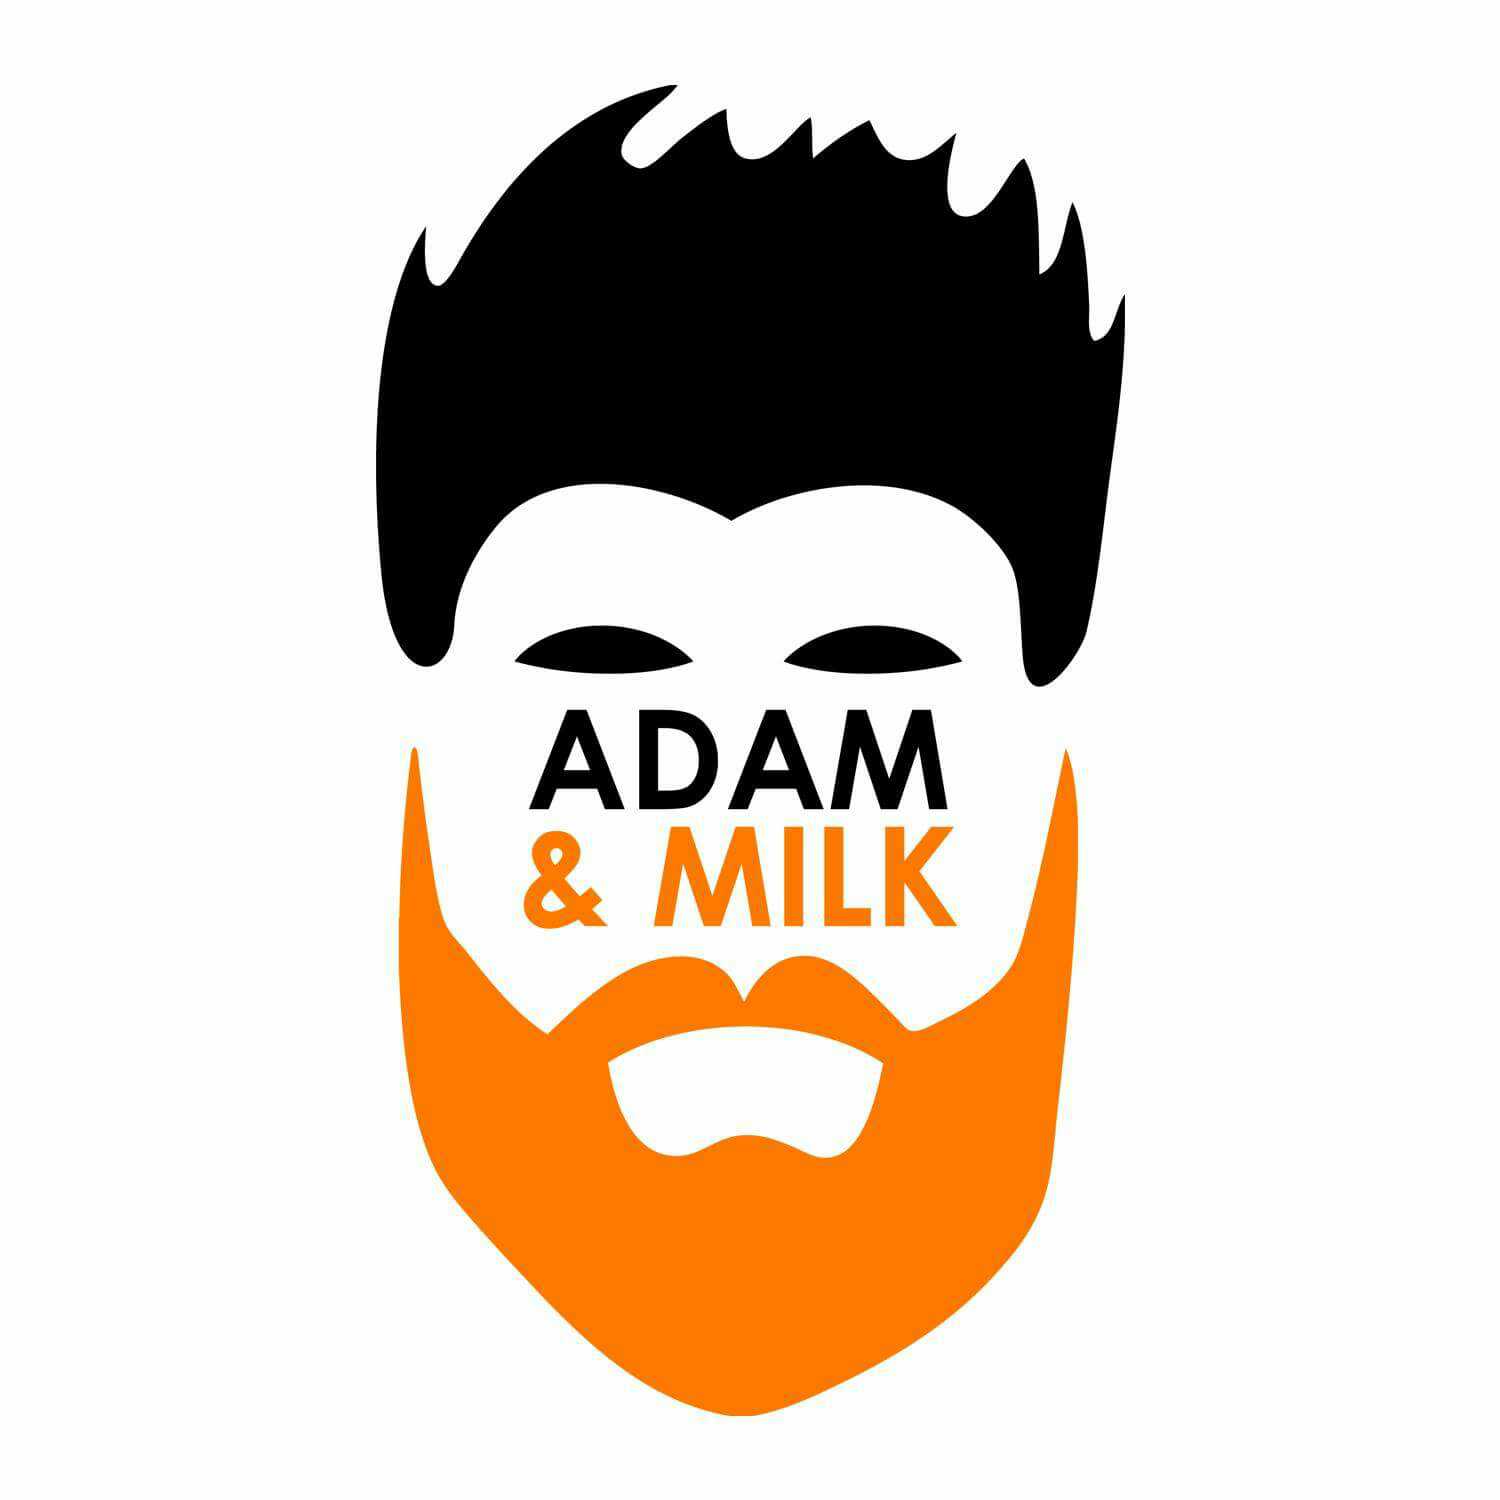 039 - Curry Cthulhu Pt.2 - Unpleasant with Adam and Milk